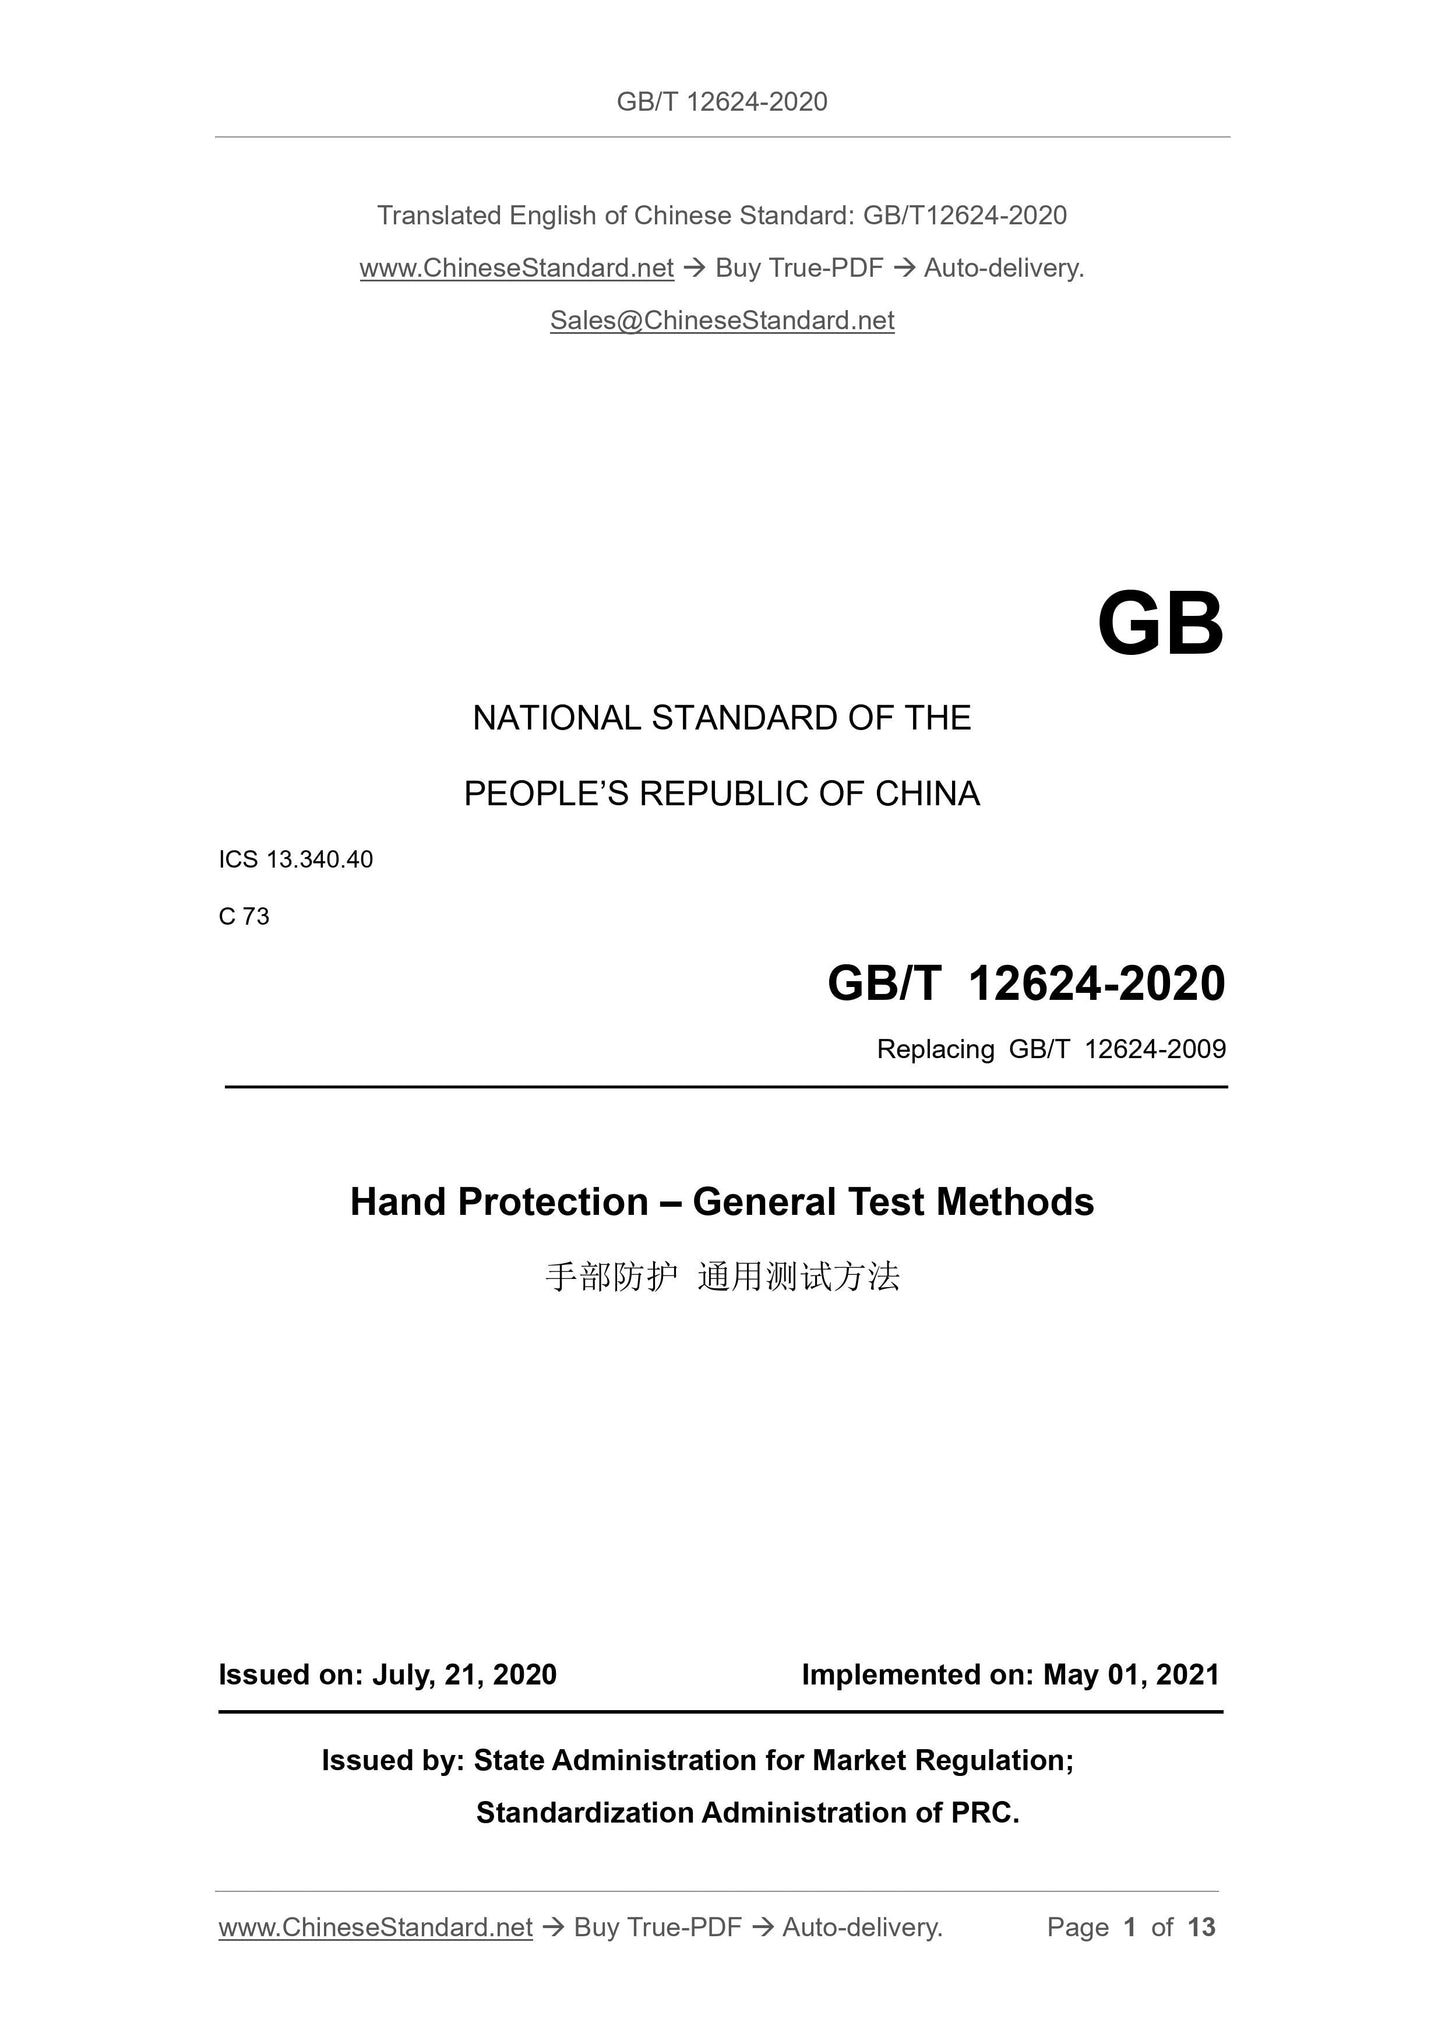 GB/T 12624-2020 Page 1